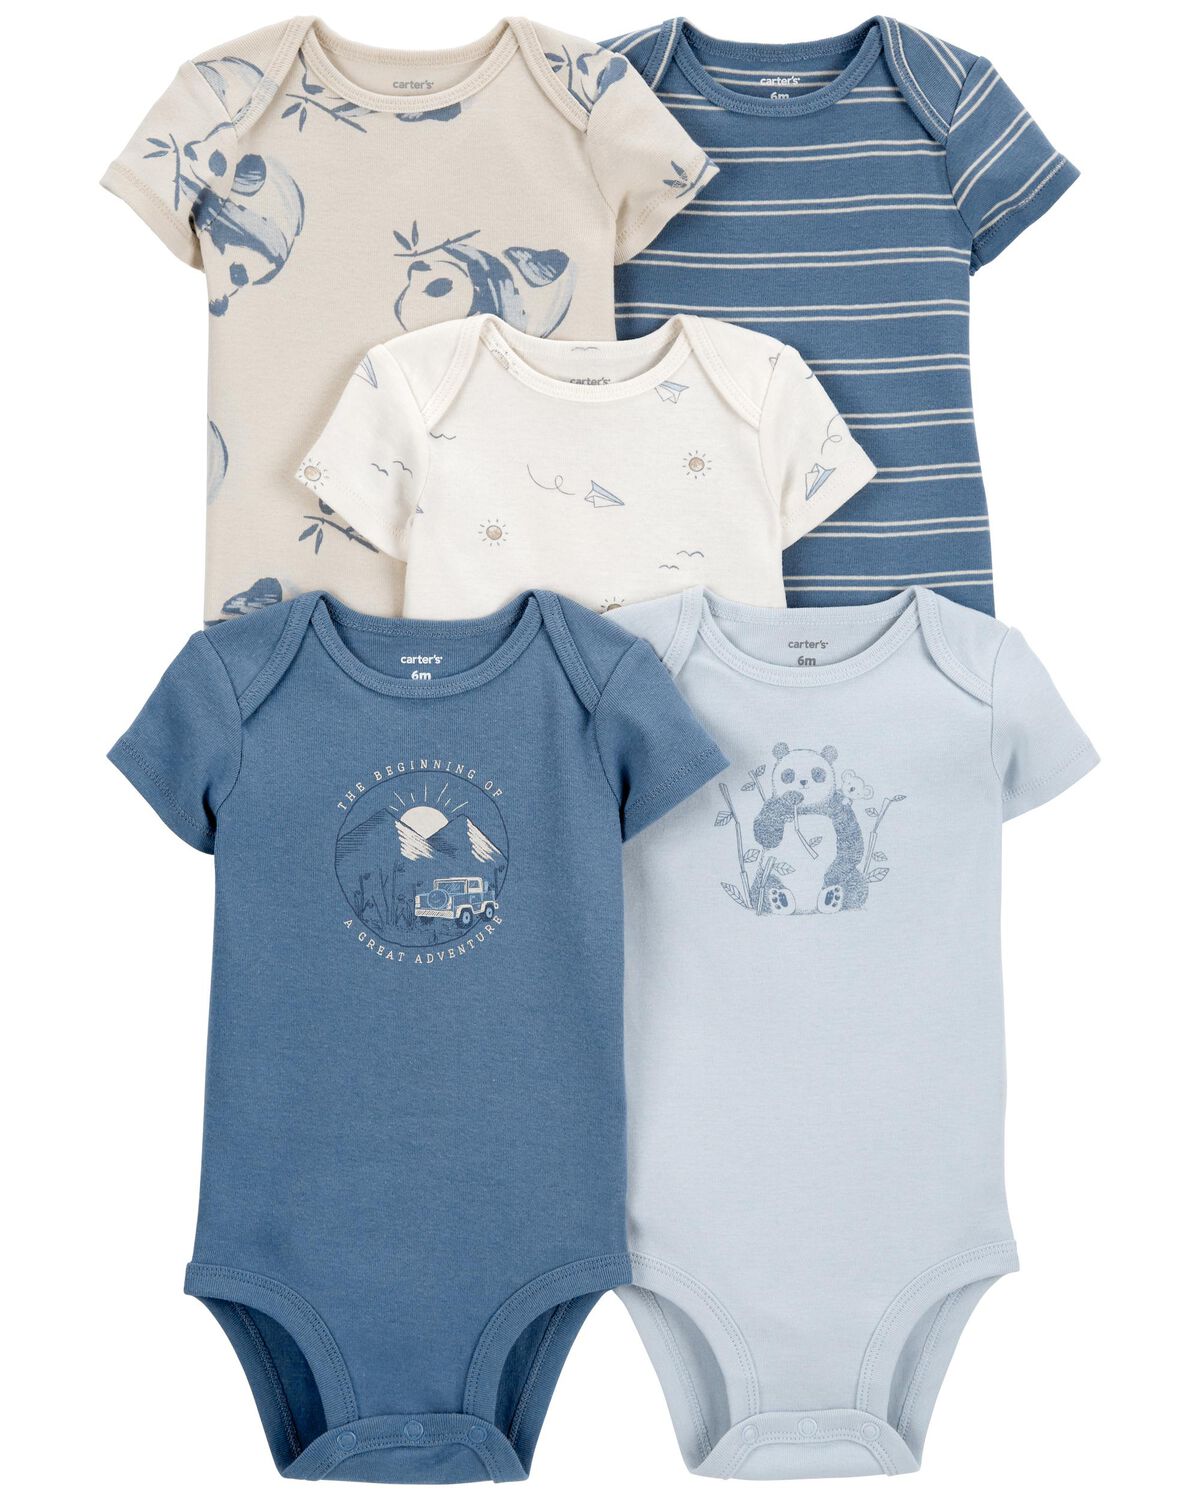 Blue/White Baby 5-Pack Short-Sleeve Bodysuits | carters.com